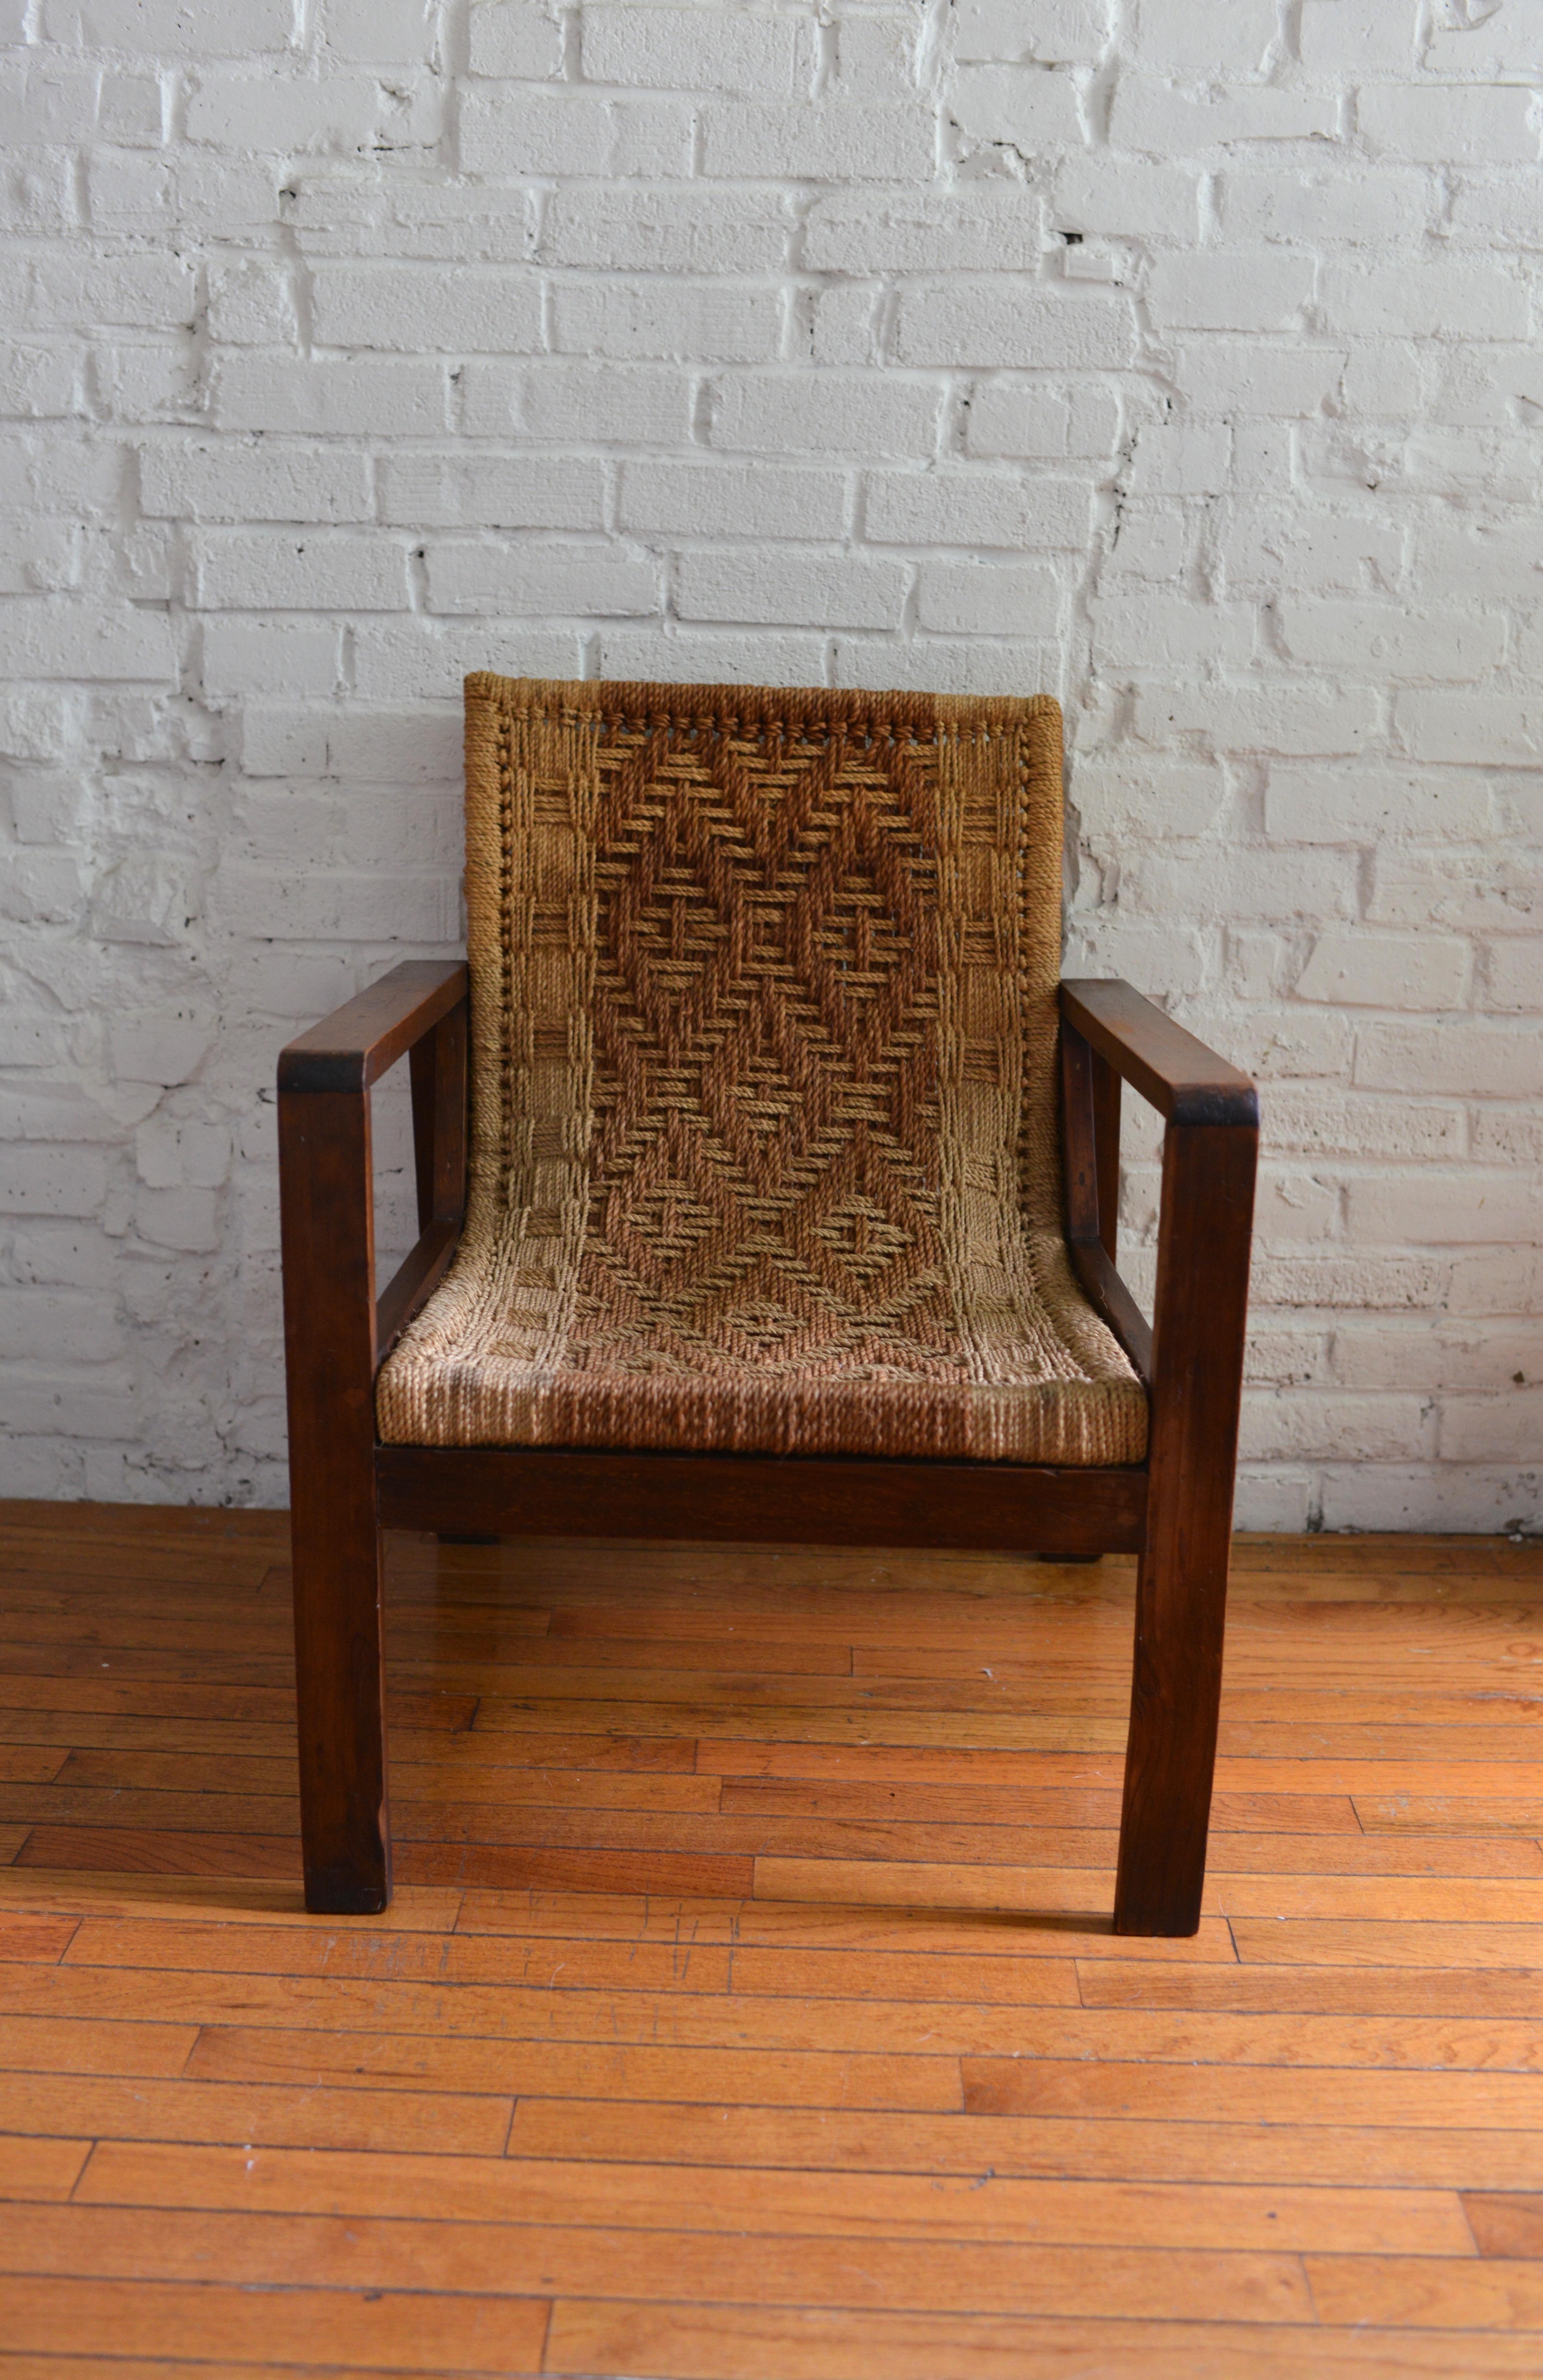 Vintage, Spanish-inspired pine and rush lounge chair. This rustic chair features a beautiful rush seat with a warm mid-toned wood frame. Similar in style to designs by Spanish designer Clara Porset. The former owner acquired the piece in 1968. The